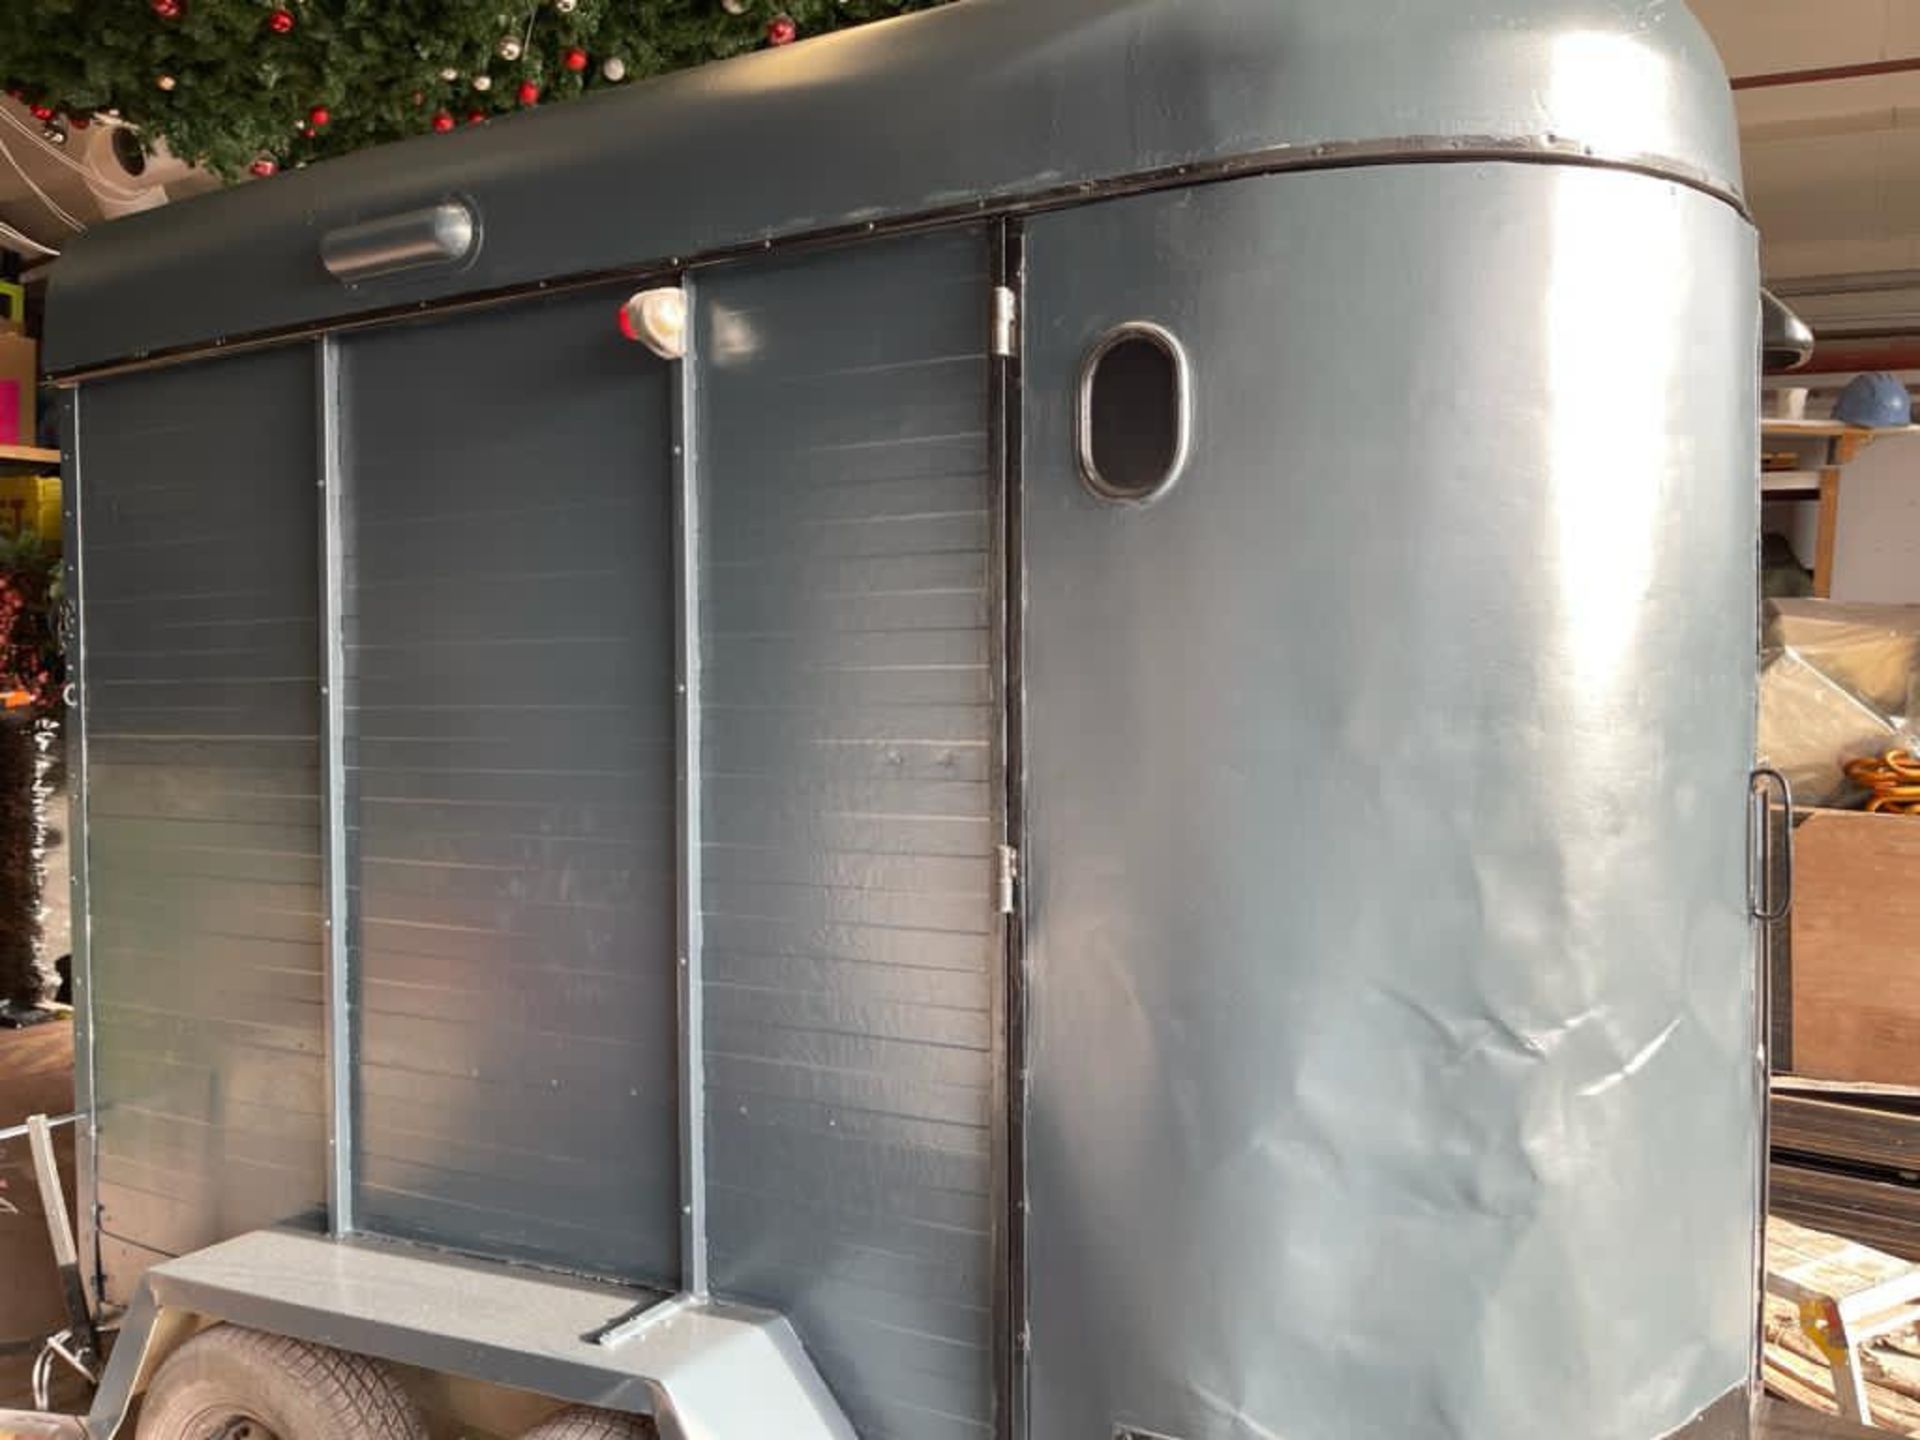 1 x Vintage Style Horse Box - Recently Renovated And Repainted - Street Food/Bar Project - CL548